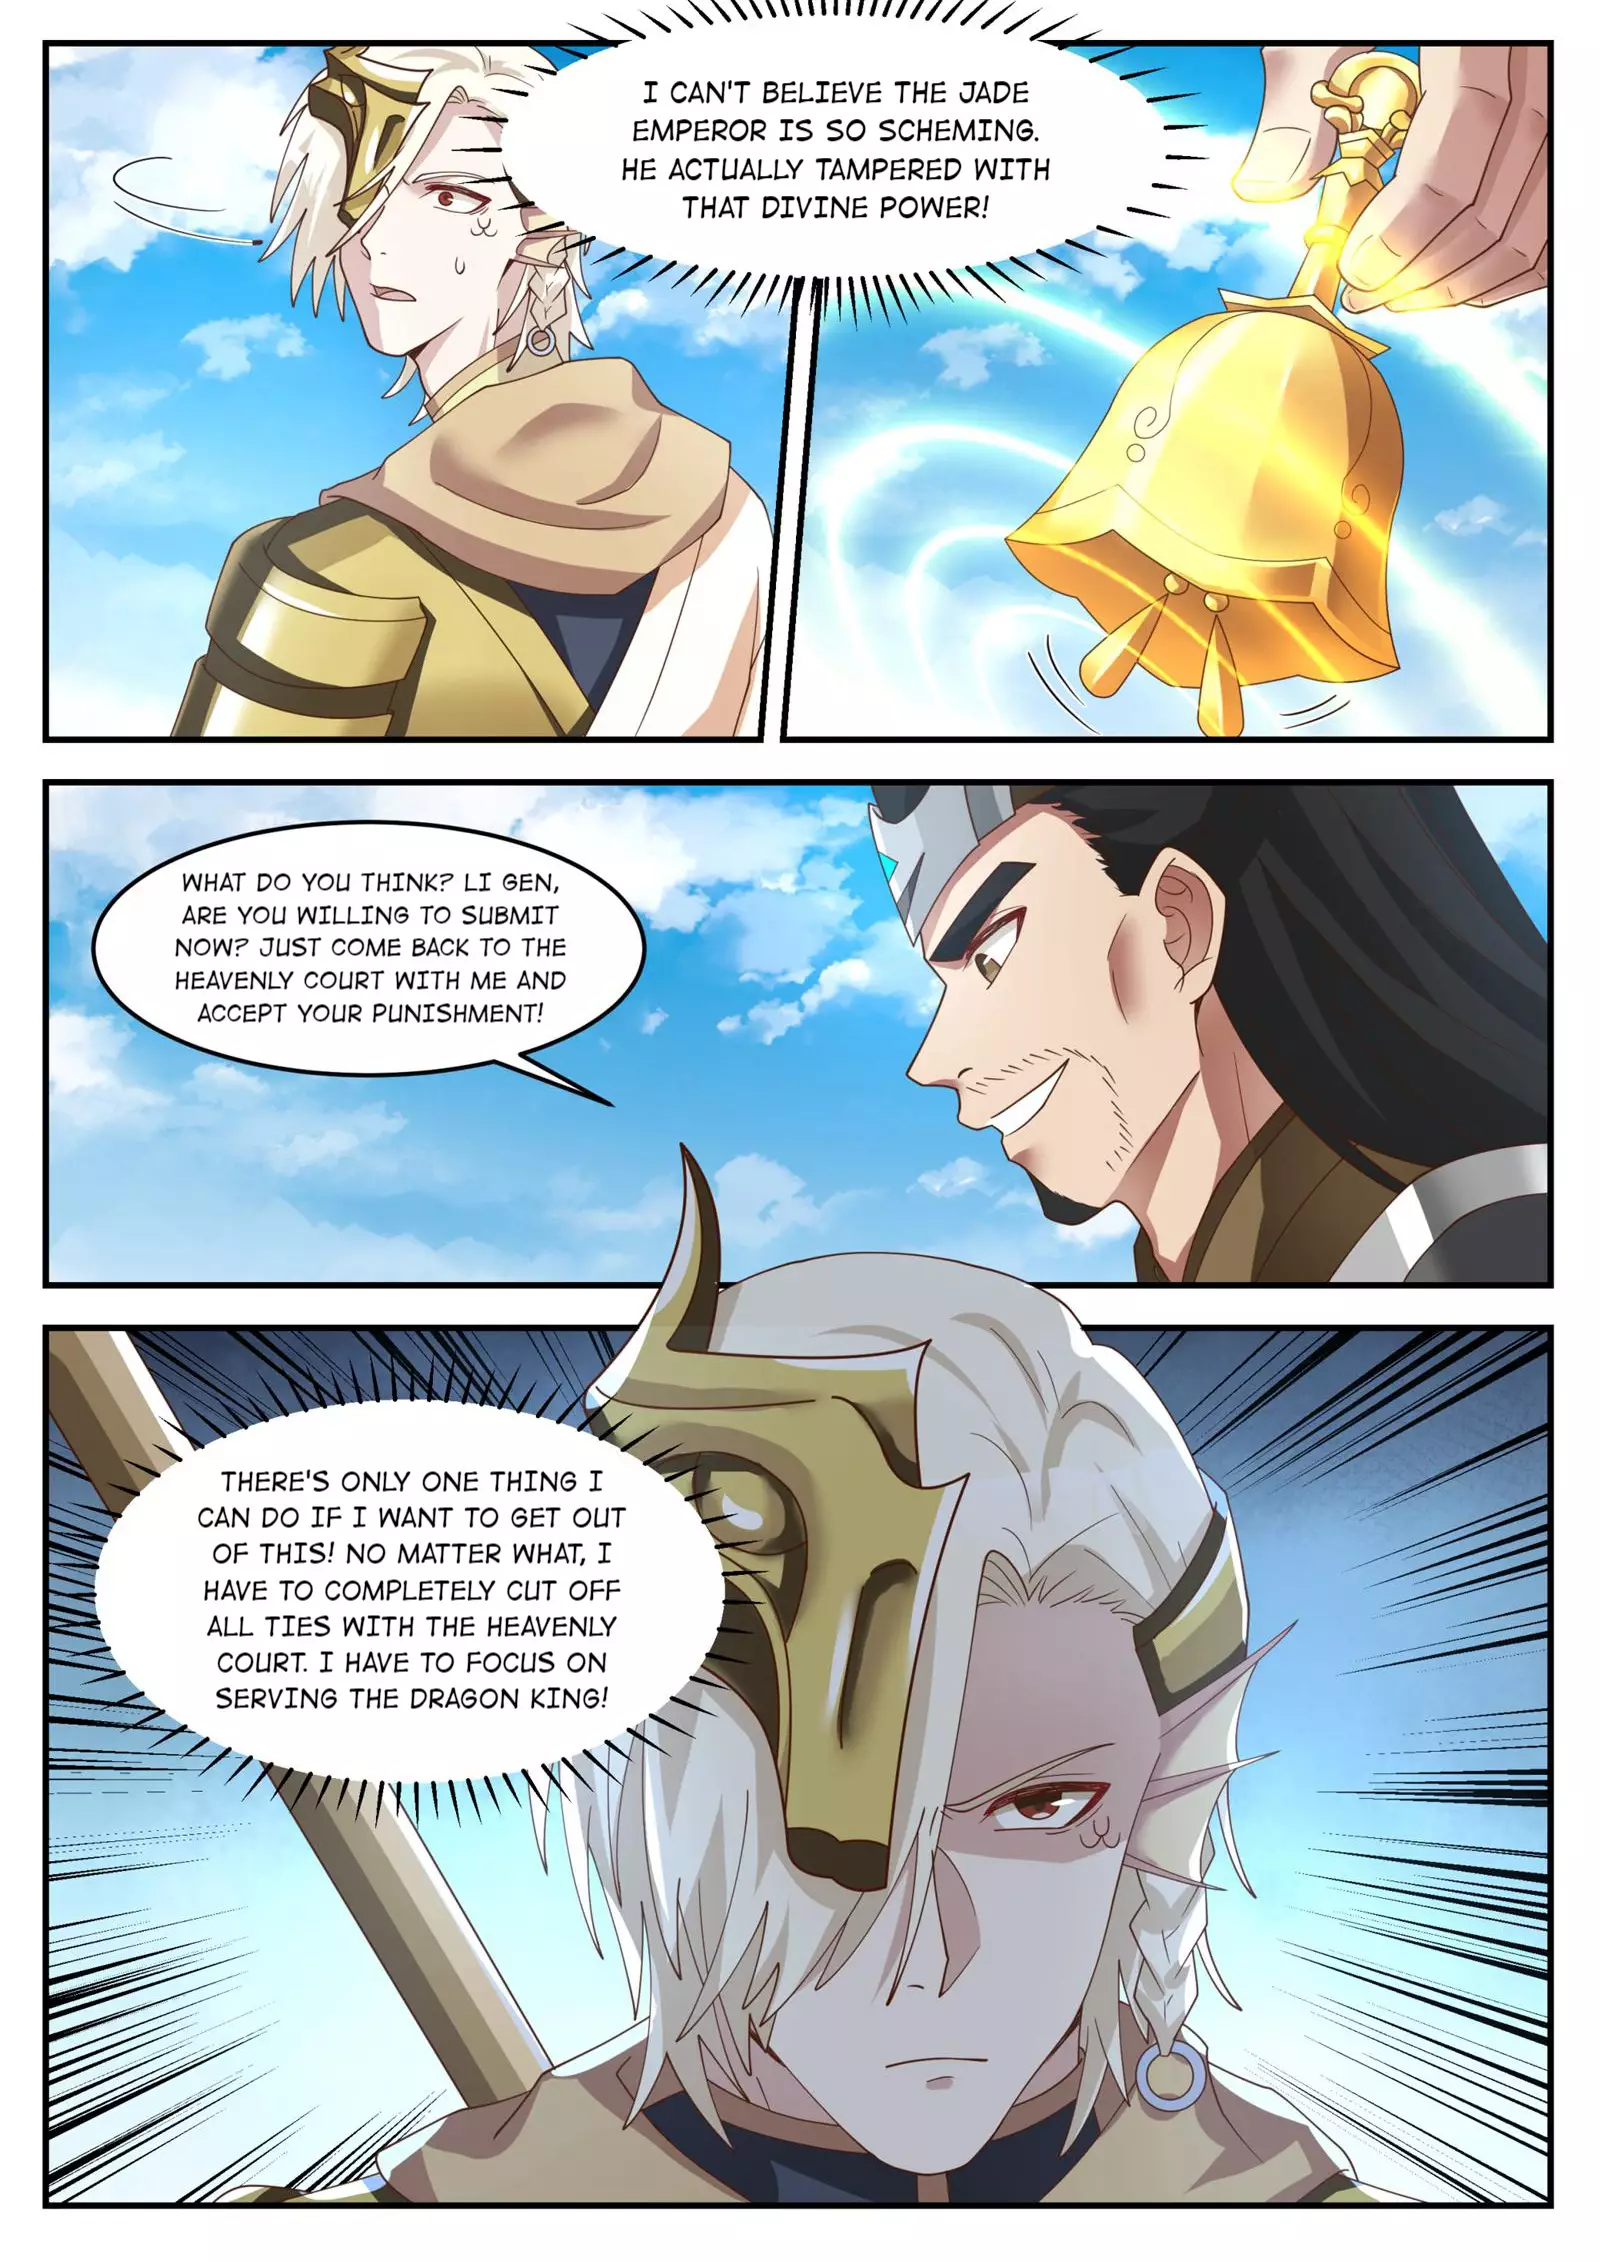 Throne Of The Dragon King - 170 page 9-2bad43cd